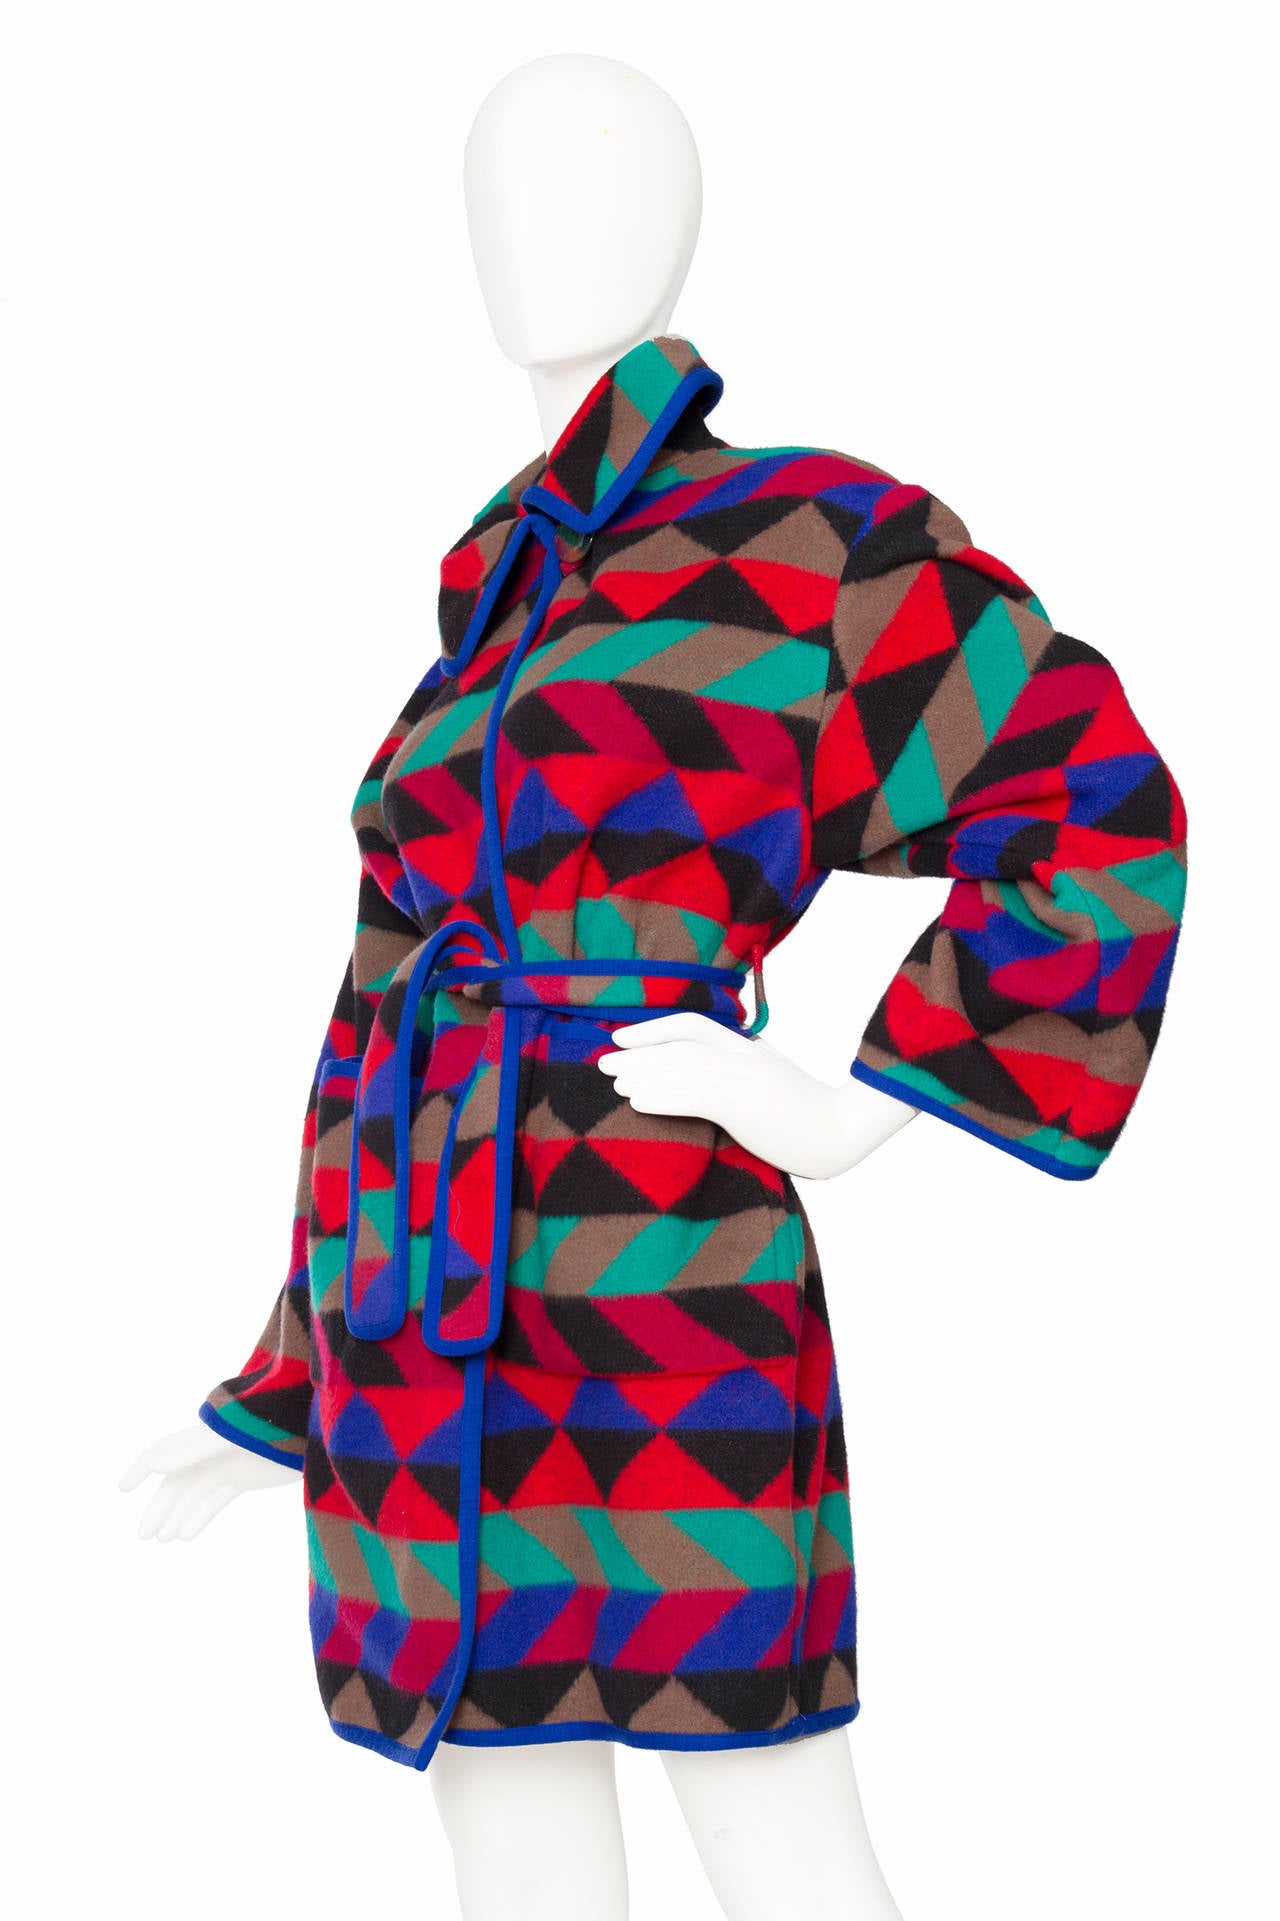 A 1980s Missoni wrap coat in bright colours. The coat has a single top button closure, a matching belt to tie around the waist and two patch pockets to the front. A matching blue trim gently frames the coat.

The size of the coat corresponds to